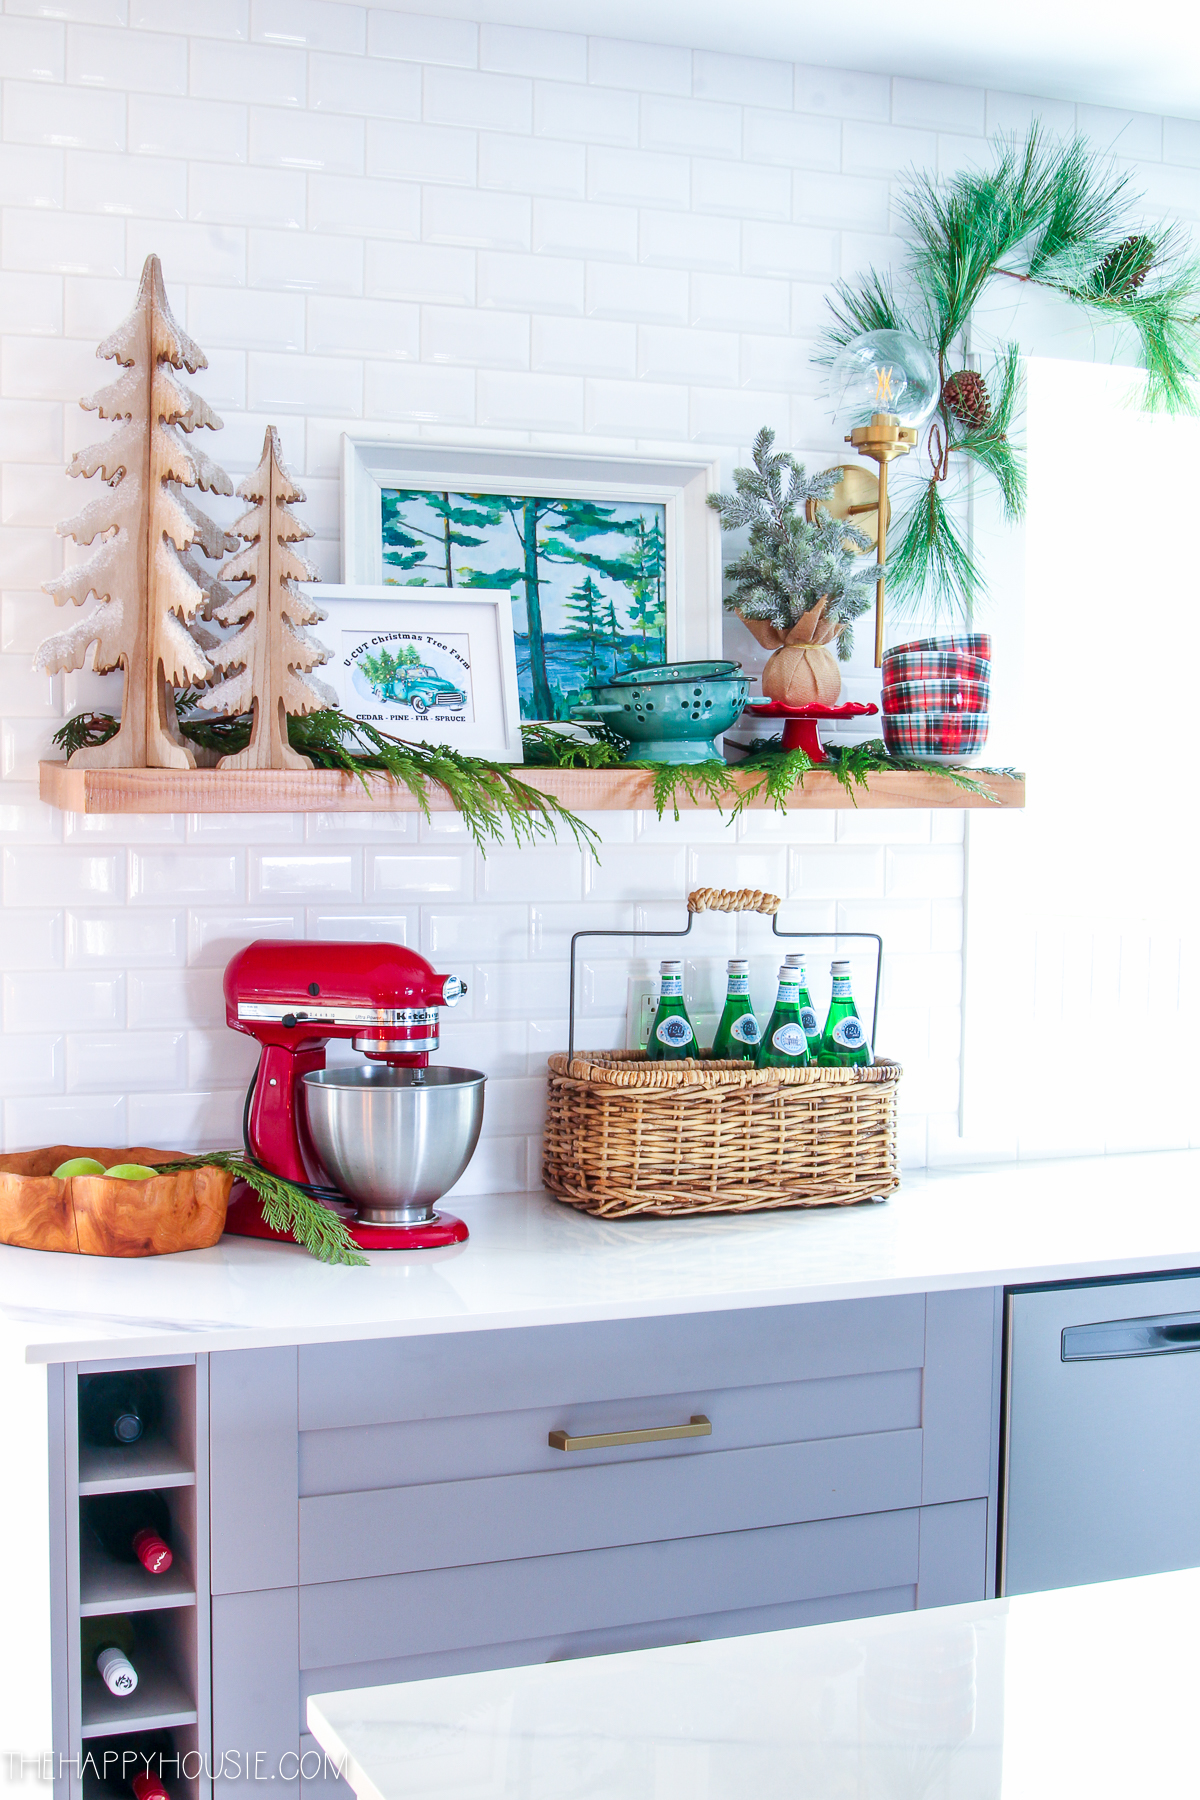 A light and bright kitchen decorated for the holidays.